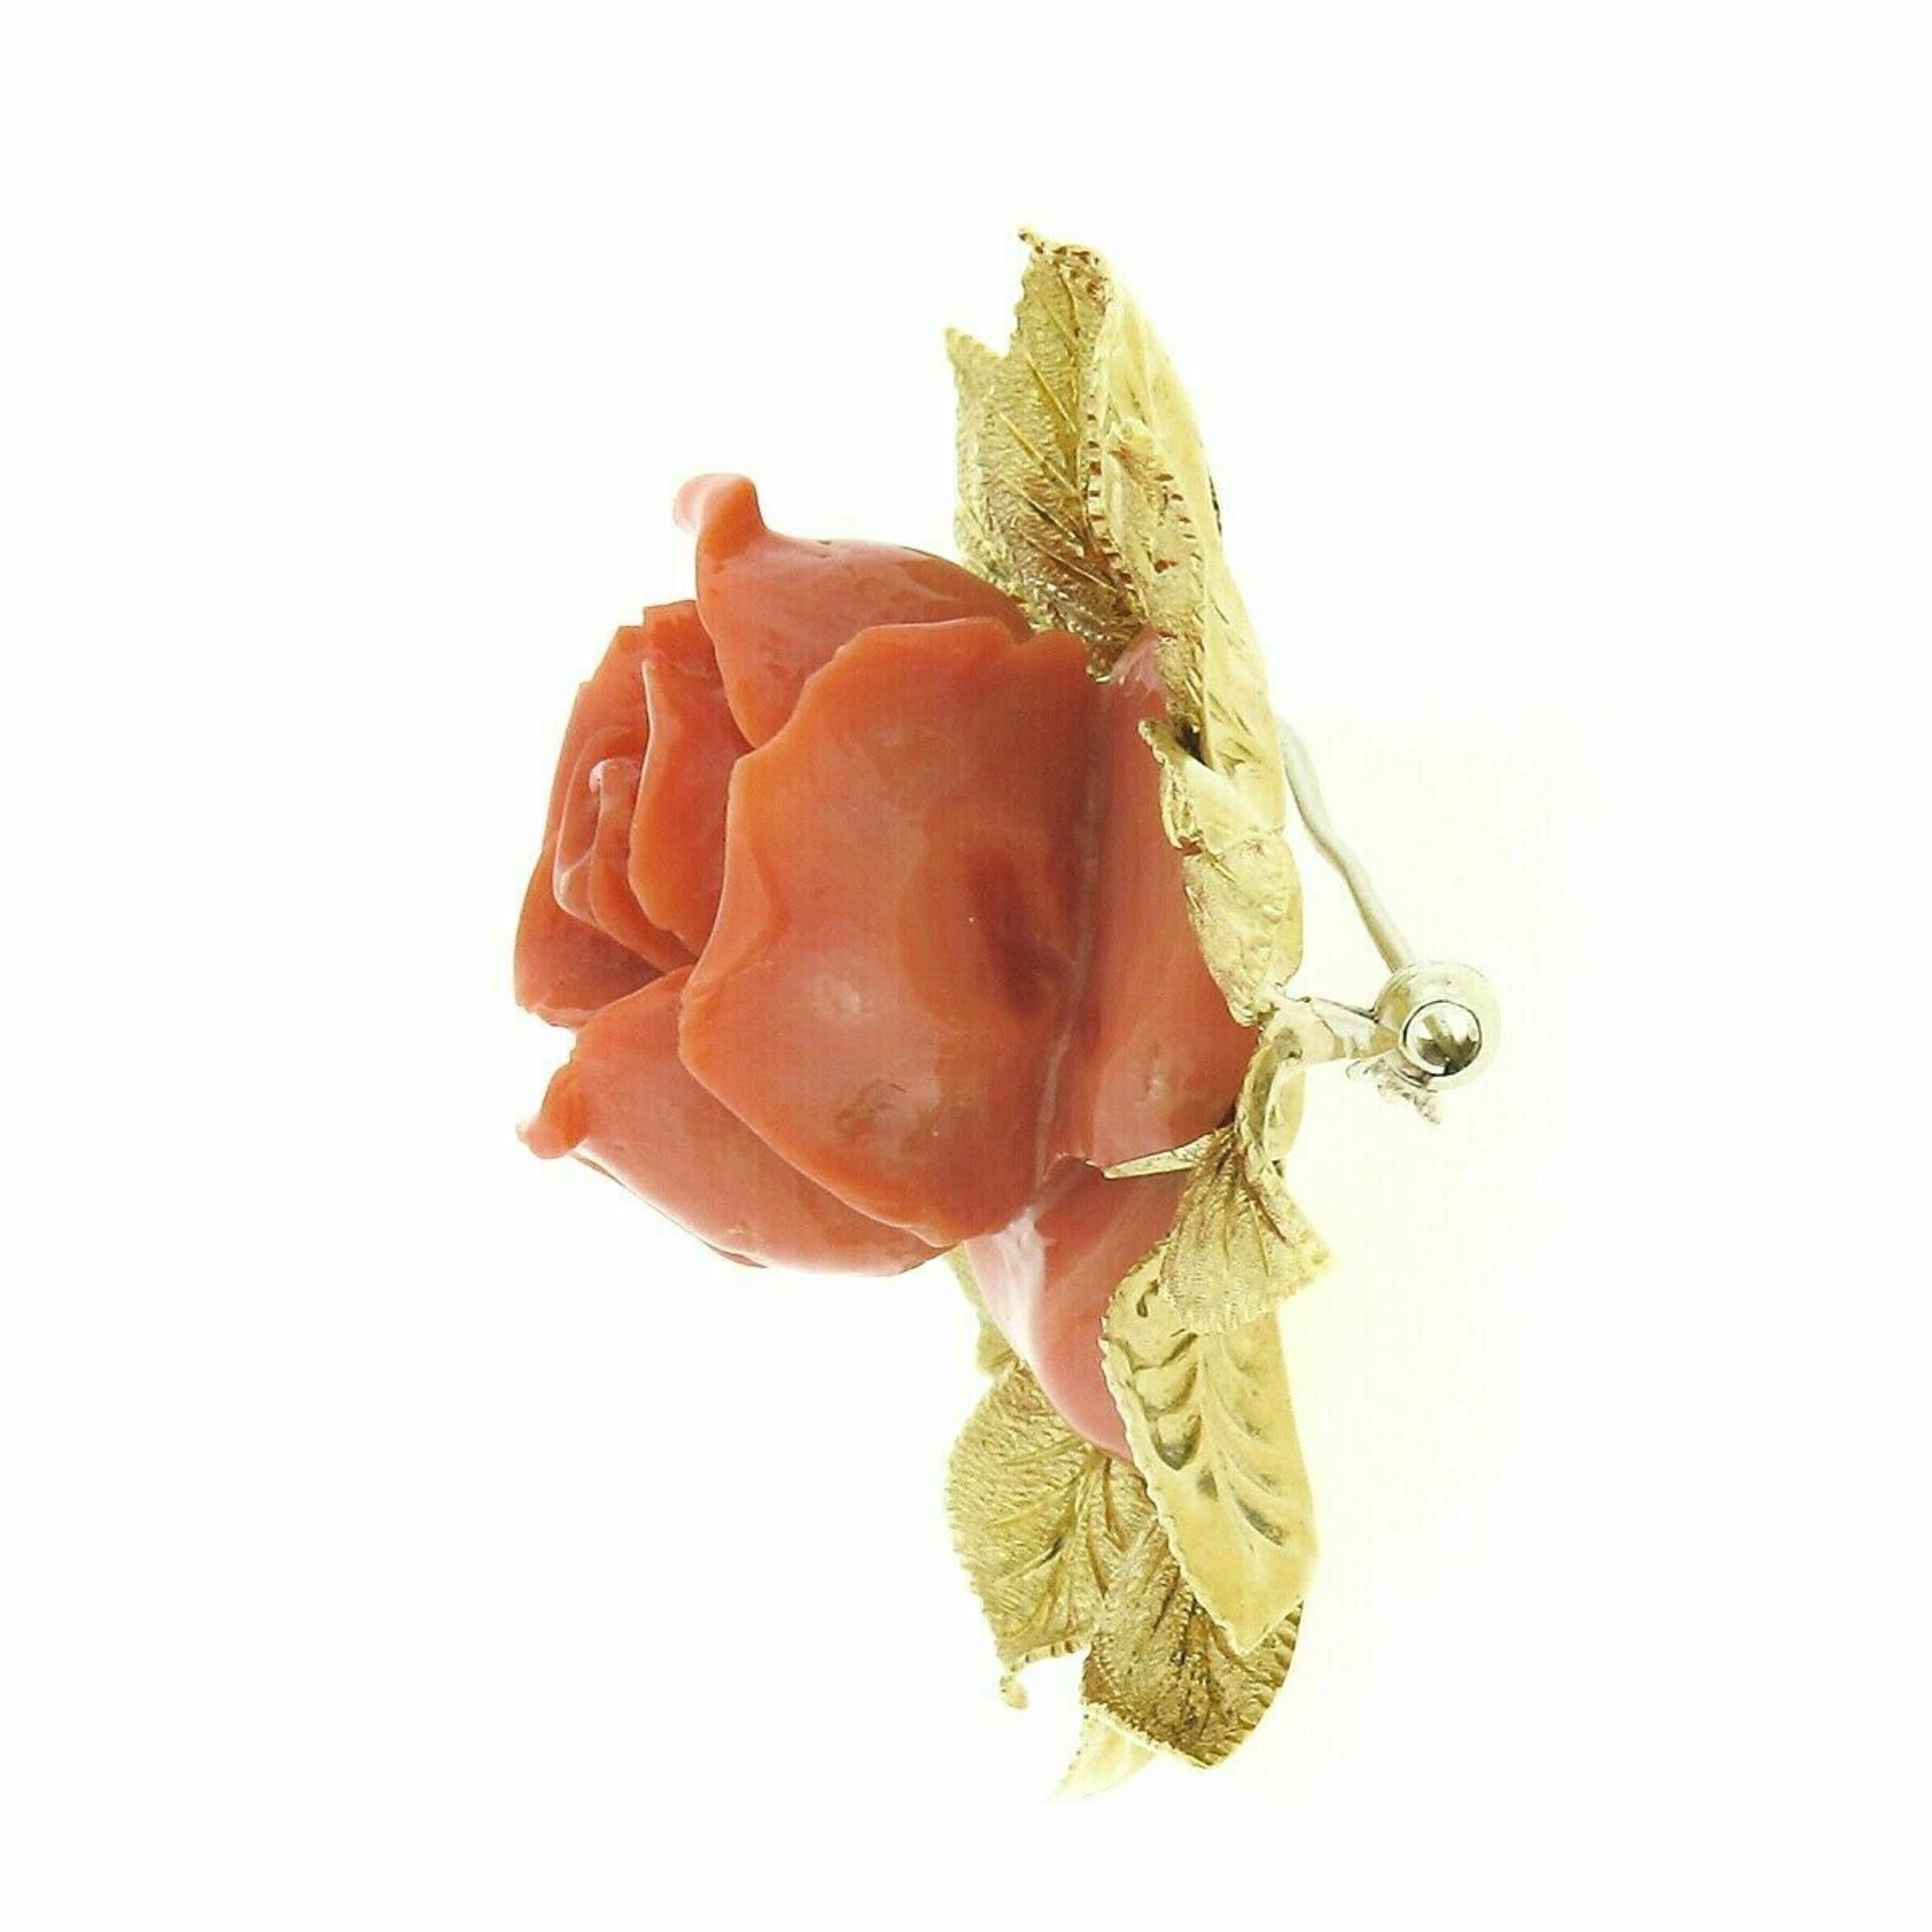 This large and very well-made vintage brooch was crafted from solid 18k yellow gold. It features a beautiful, GIA certified, natural coral set into an incredibly detailed and textured leaf border frame. The coral is a reddish-orange color and is